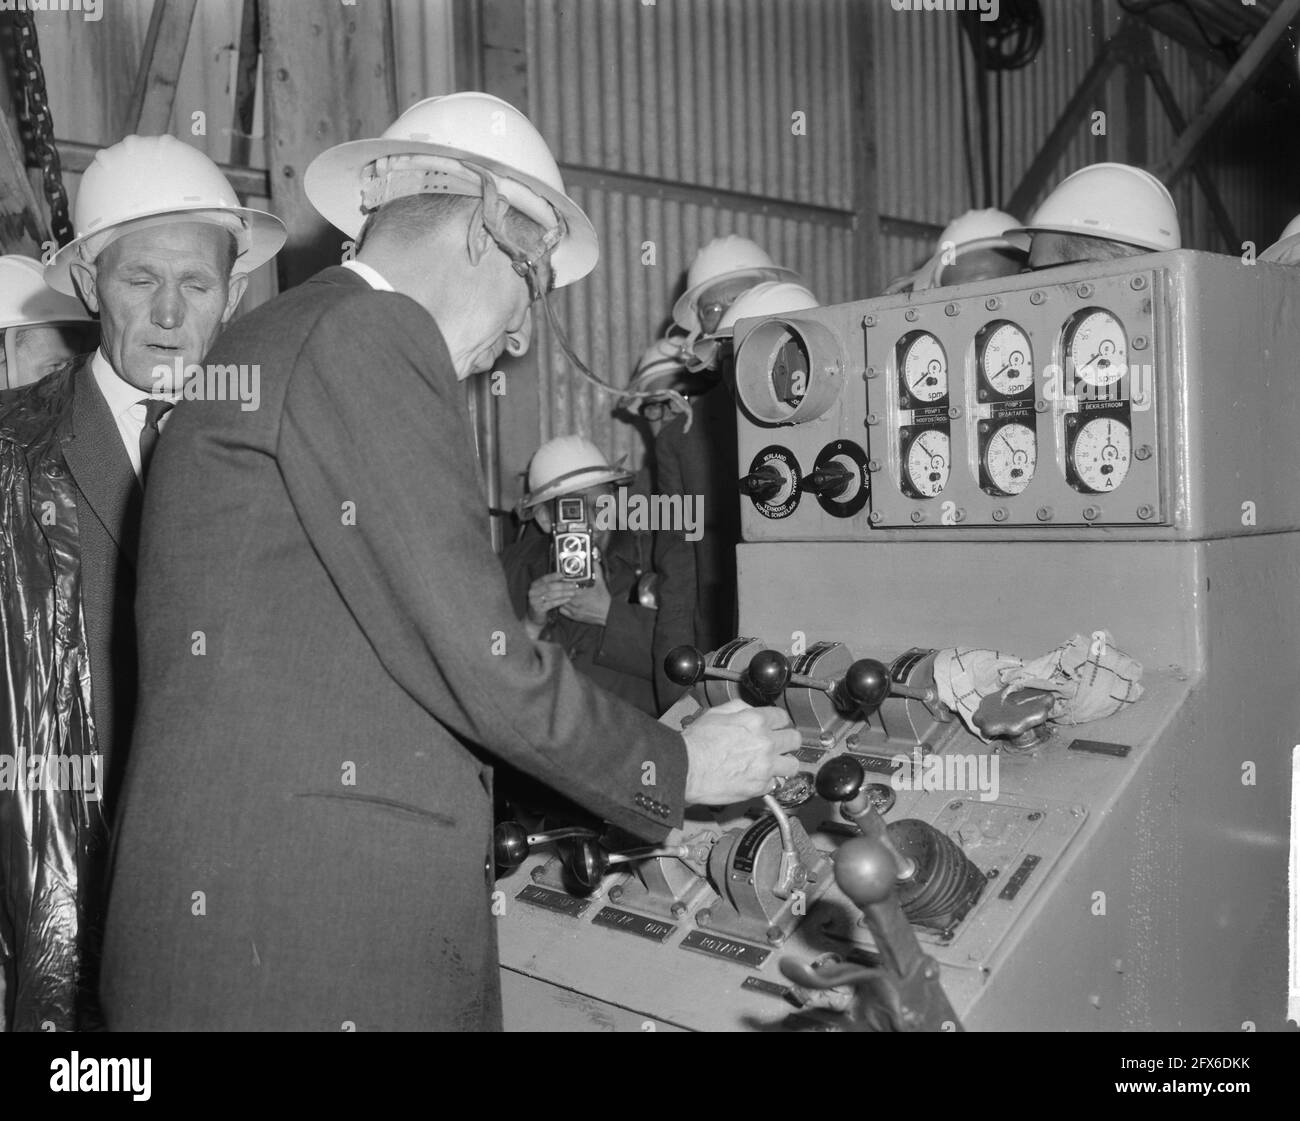 Natural gas field at Slochteren officially put into use Mr. Fock and Dr. de Pous during the commissioning of the tower, July 25, 1963, The Netherlands, 20th century press agency photo, news to remember, documentary, historic photography 1945-1990, visual stories, human history of the Twentieth Century, capturing moments in time Stock Photo